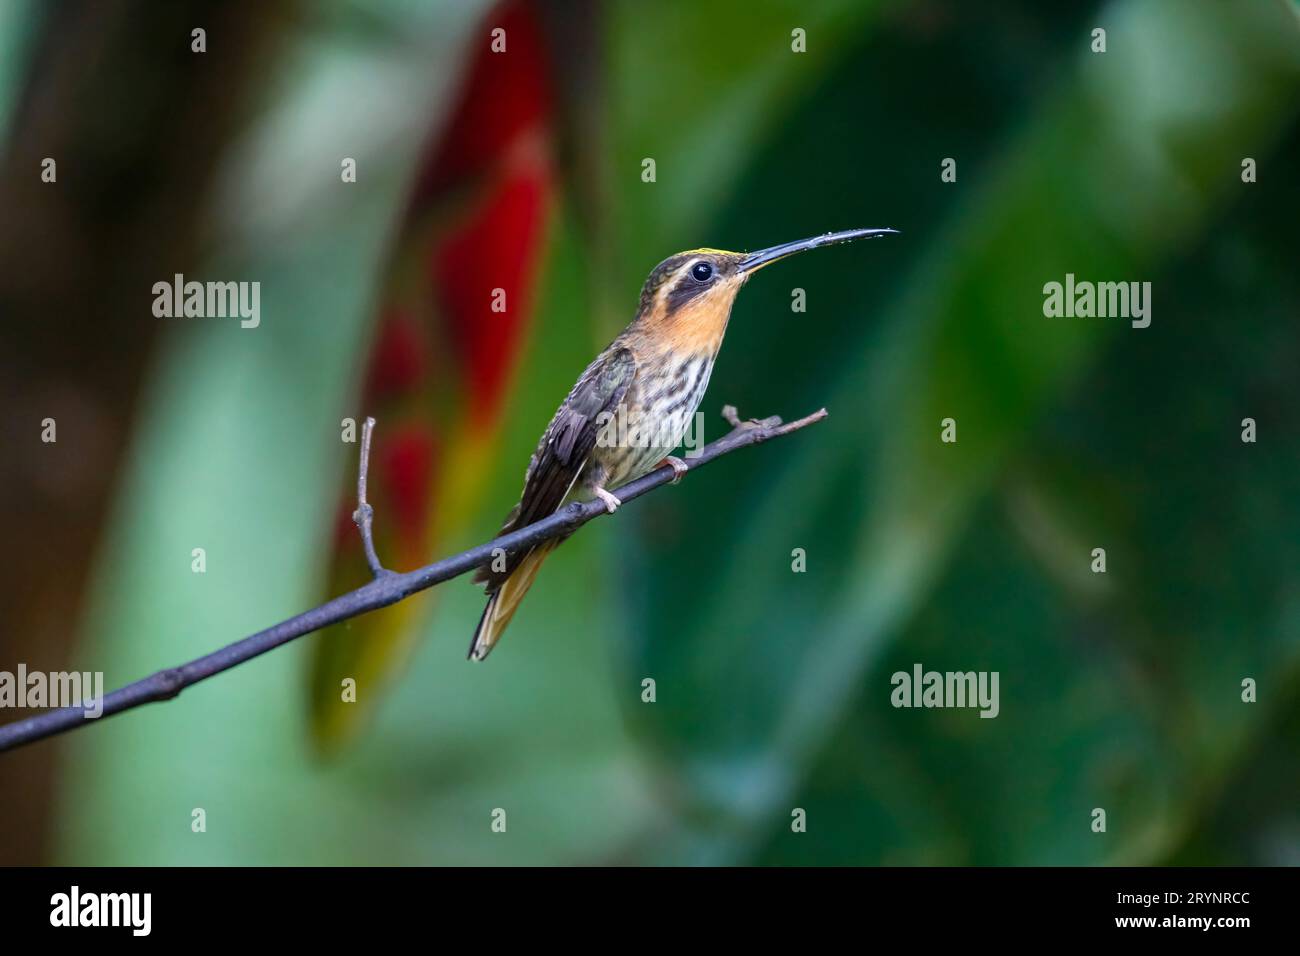 Close-up of a Saw-billed hermit, side view, perched on a branch against defocused background, Folha Stock Photo